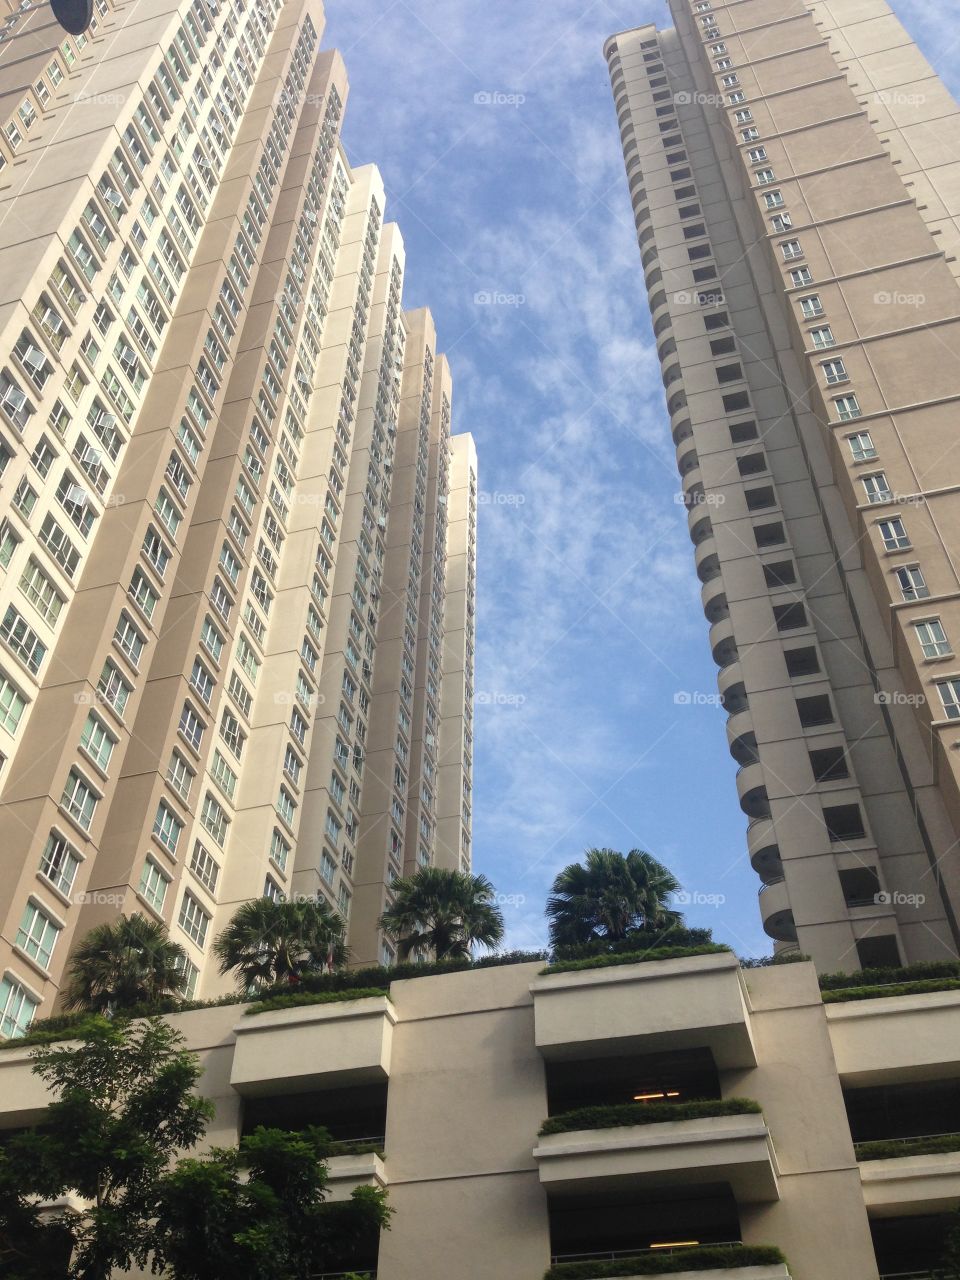 Touch the sky. Condo with blue sky